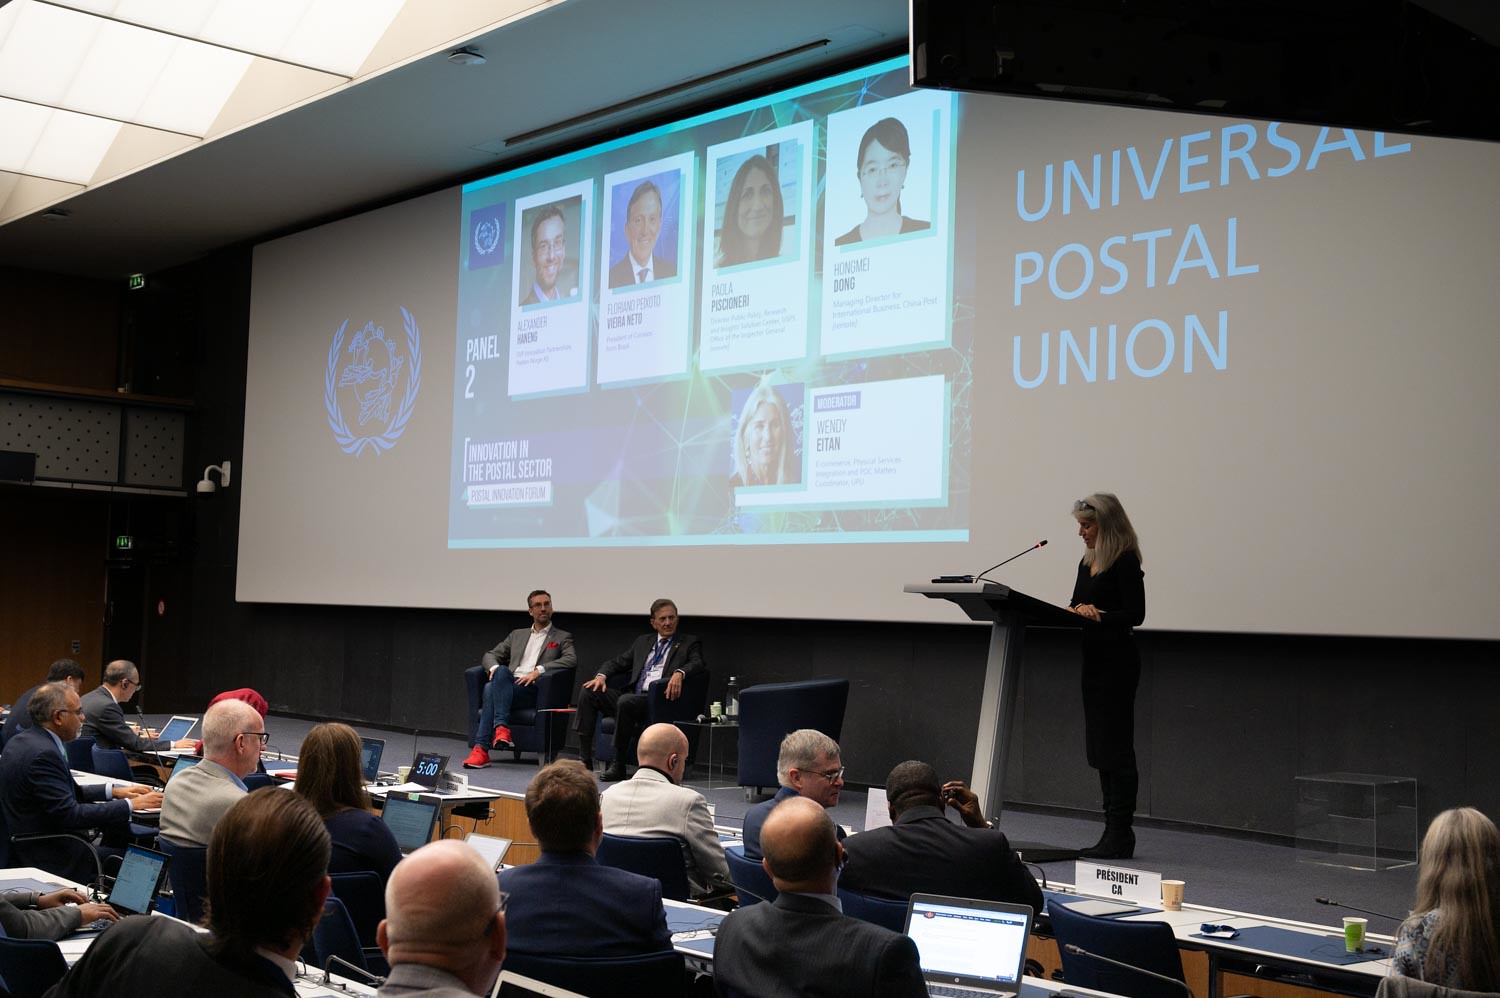 UPU Innovation Forum calls for collaboration and risk-taking